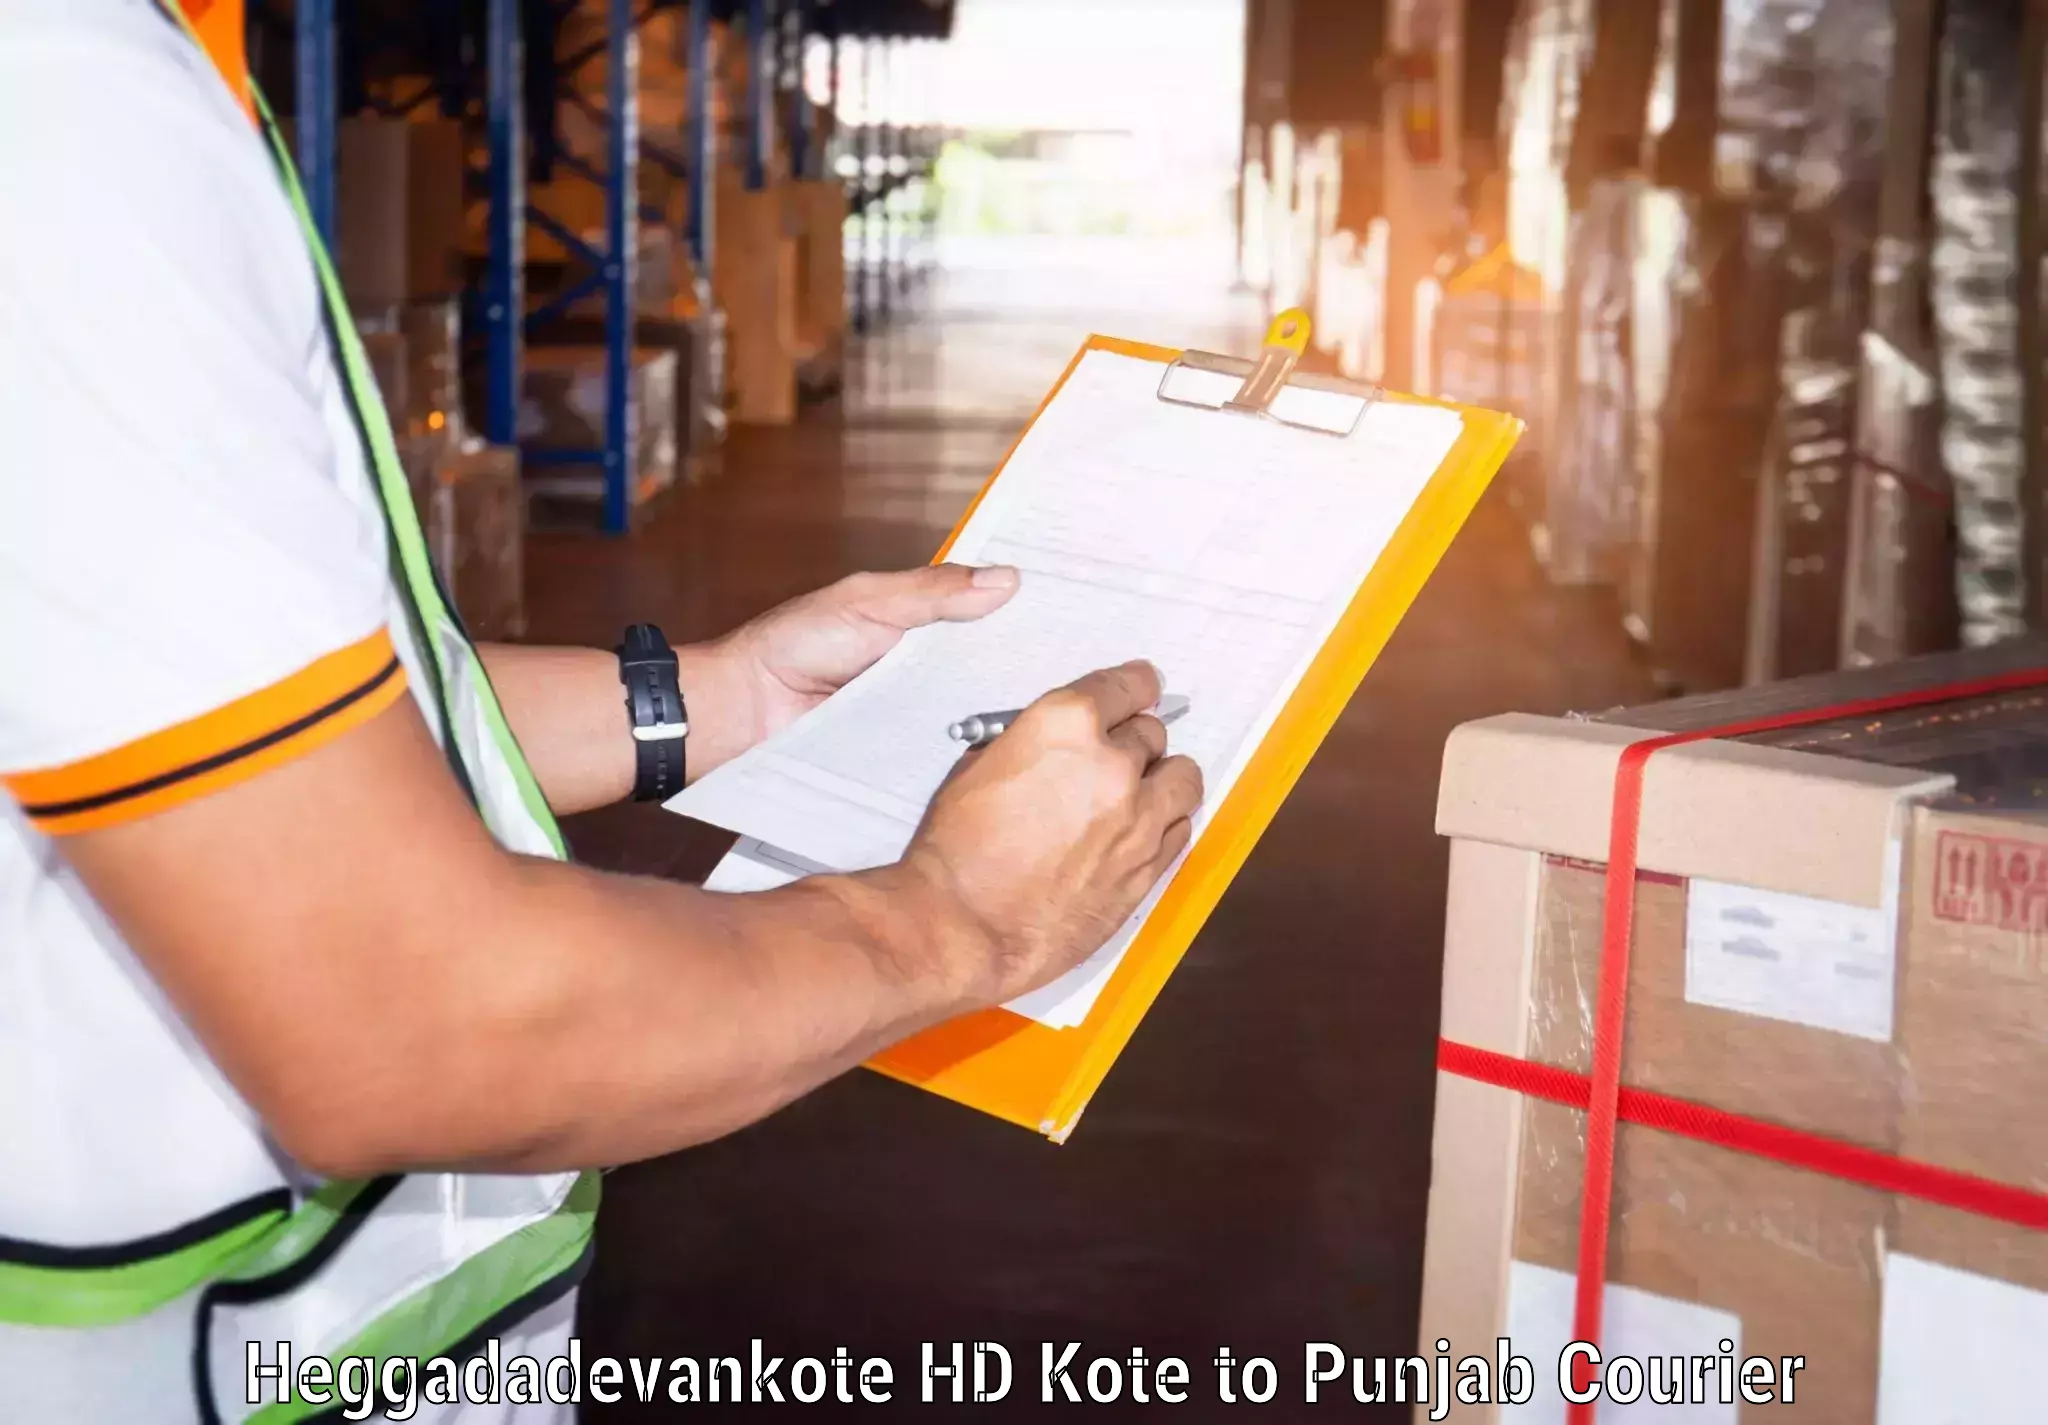 Personal courier services Heggadadevankote HD Kote to Malout